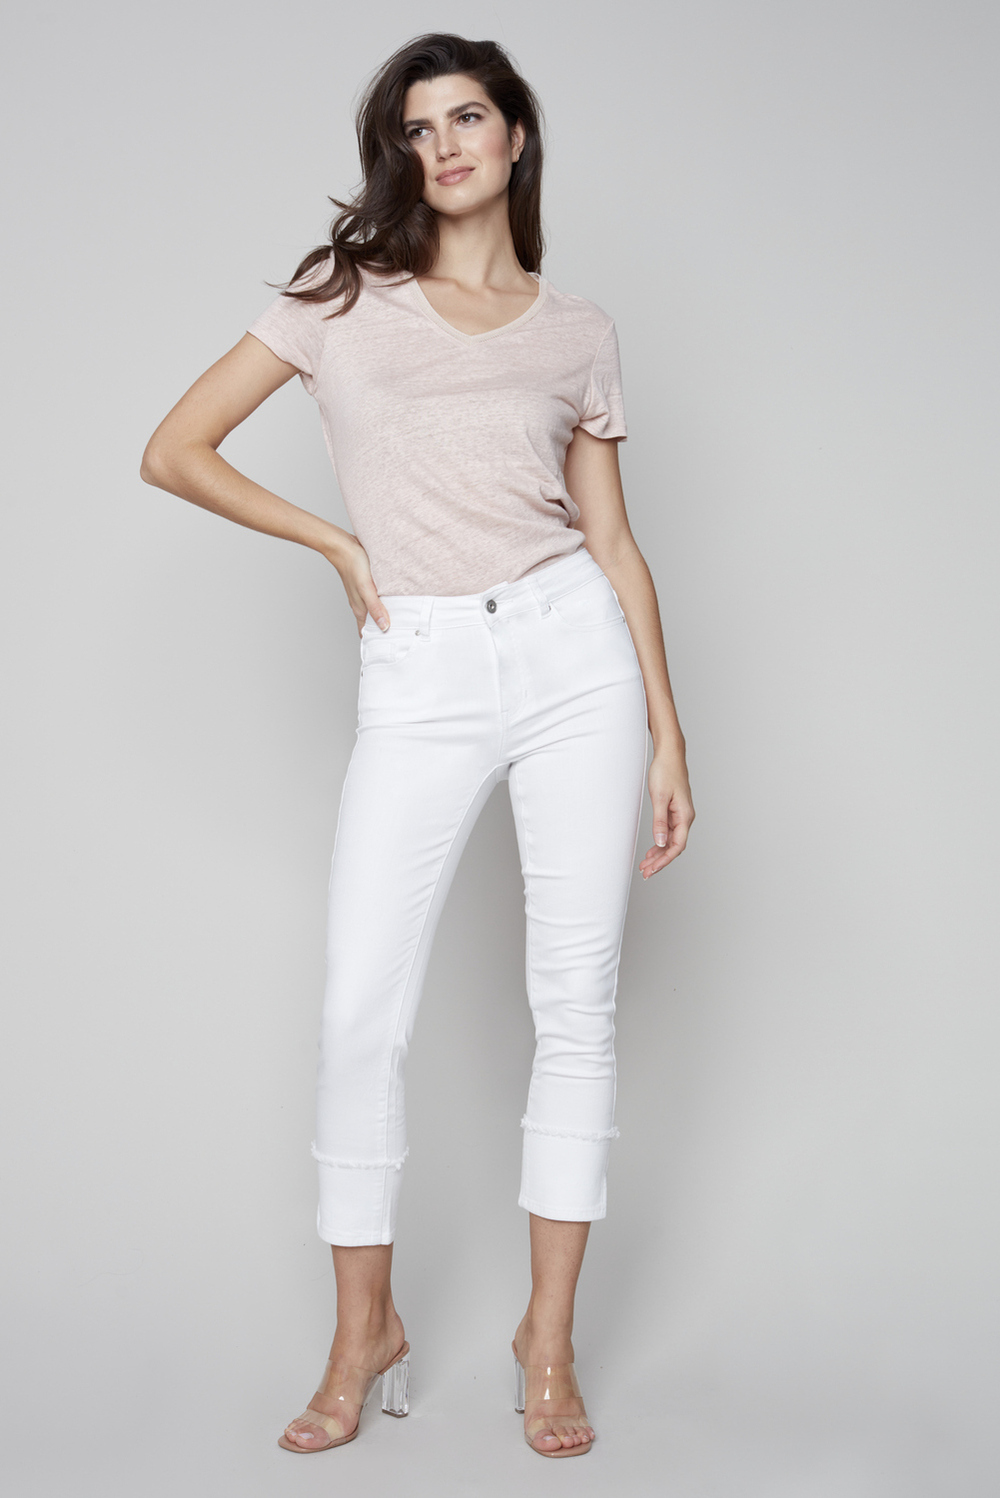 Cropped & Cuffed Pants Style C5336. White